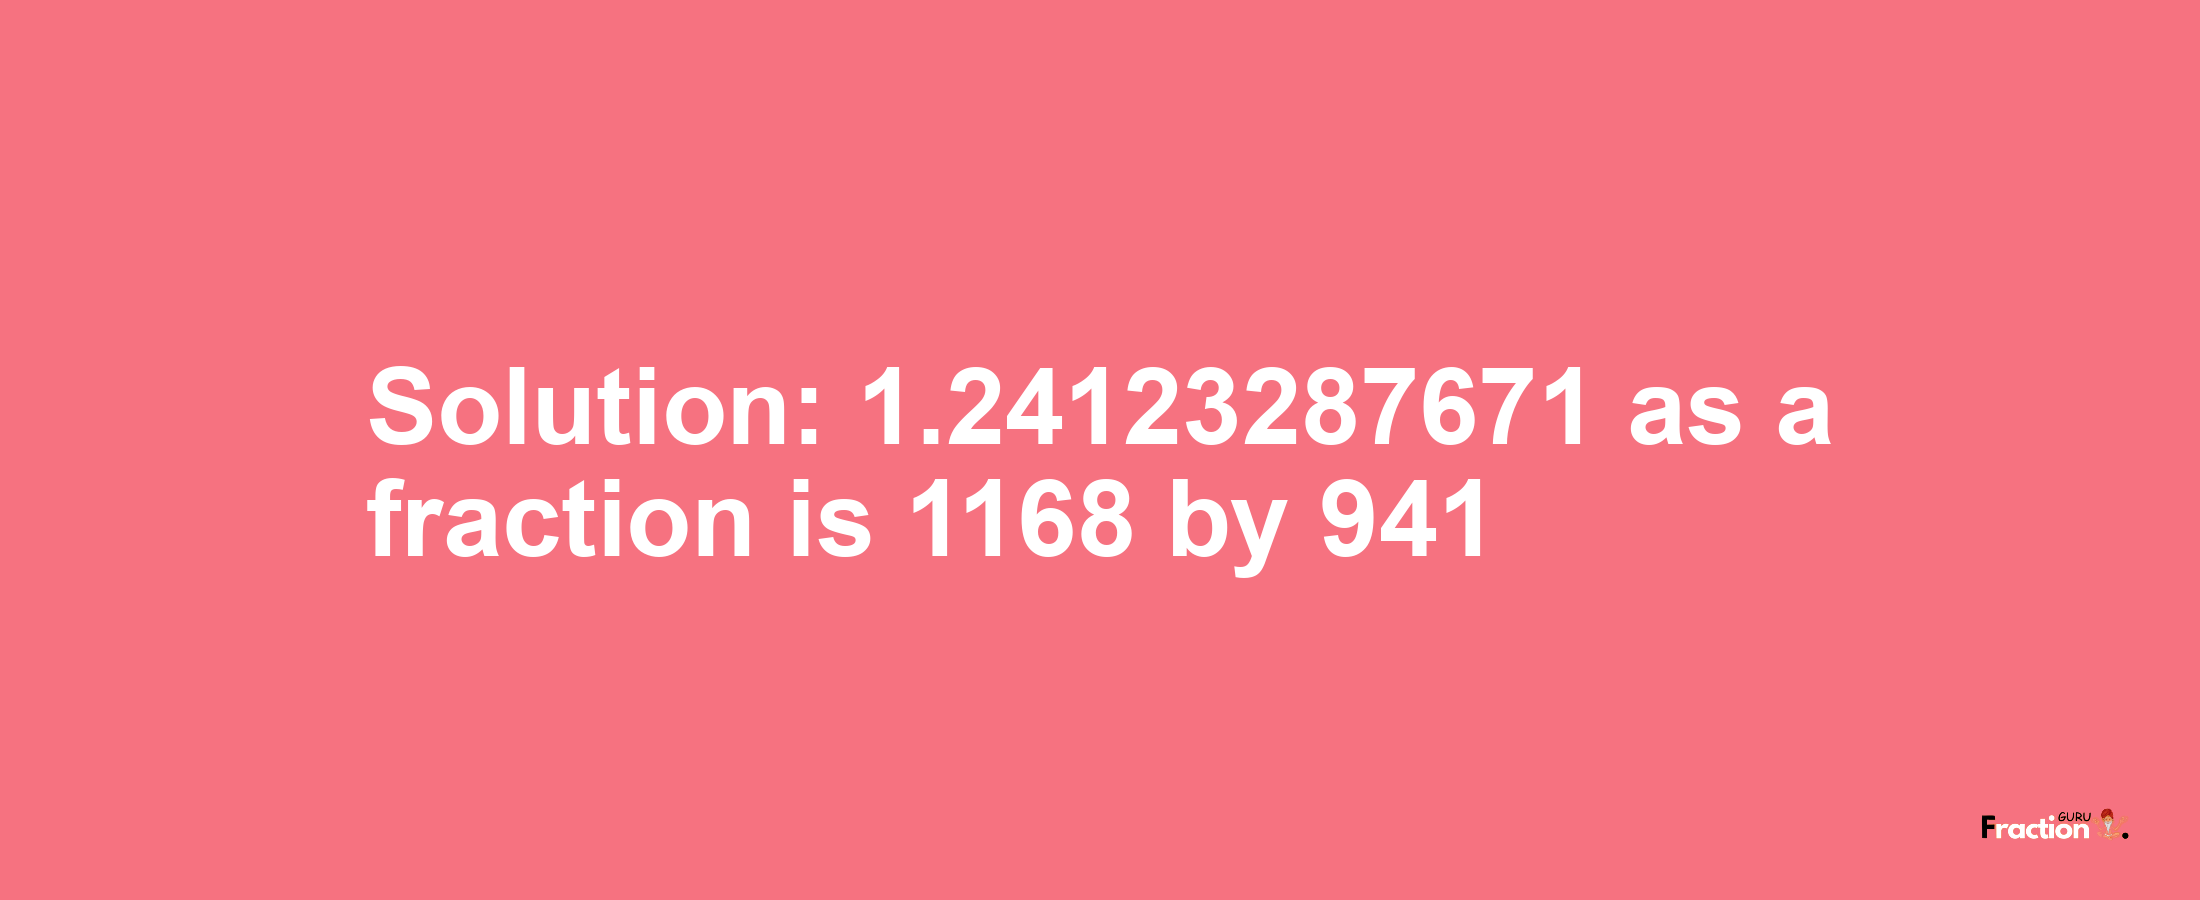 Solution:1.24123287671 as a fraction is 1168/941